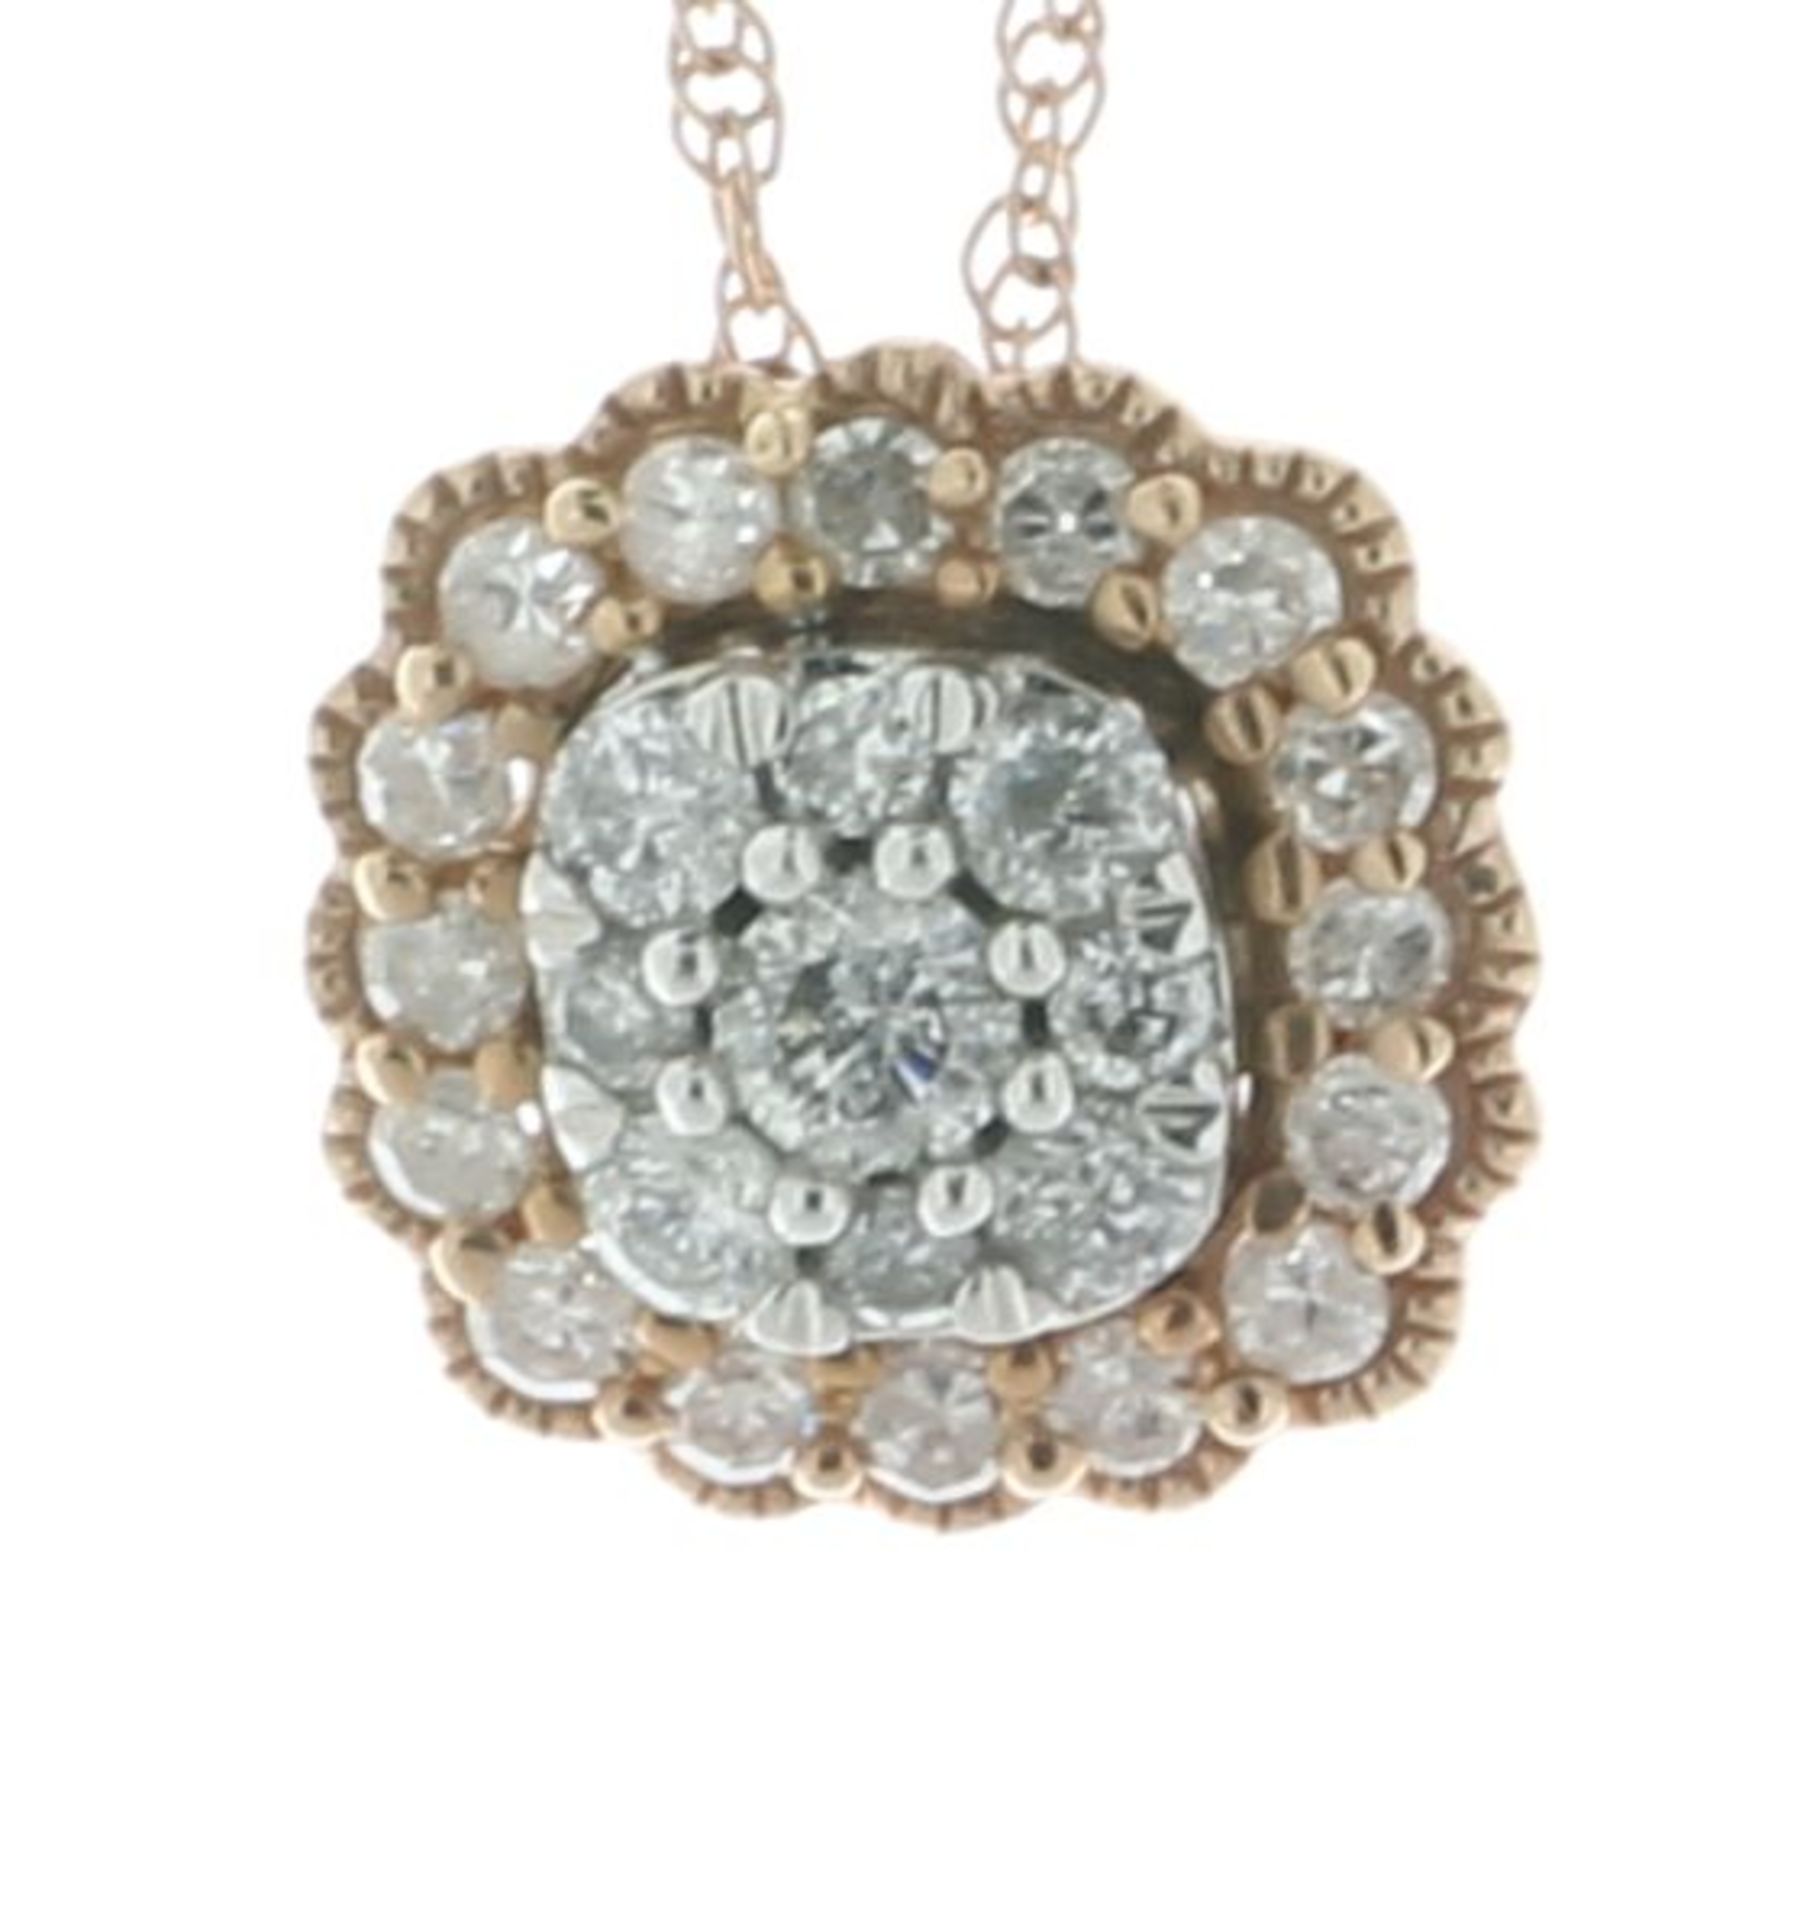 10ct Rose Gold Illusion Set Cluster Diamond Pendant And Chain 0.25 Carats - Valued By IDI £2,095. - Image 2 of 3